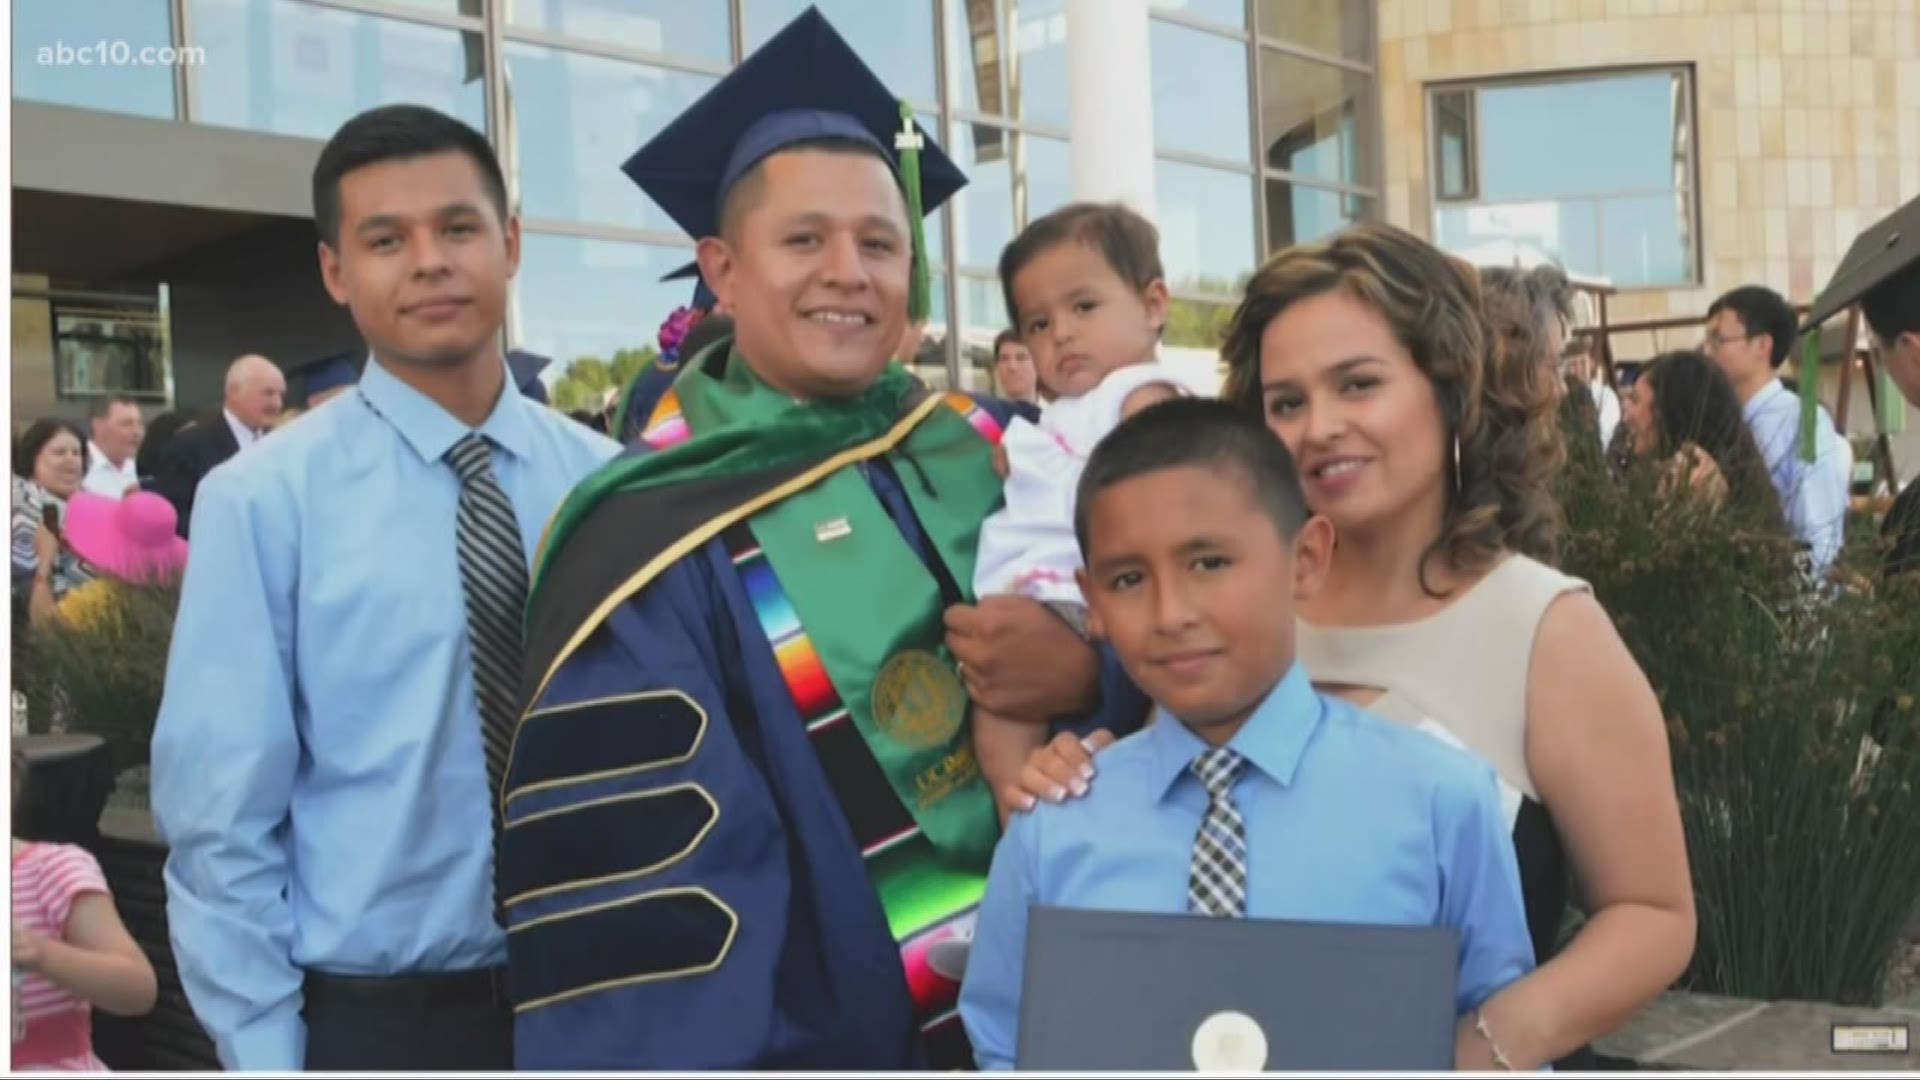 A Sacramento doctor is proving that with a lot of hard work, determination, and perseverance, it’s never too late to follow your dreams.

Luis Godoy, who was once a gang member, is now one year away from finishing his residency as a heart and lung surgeon at the UC Davis School of Medicine.